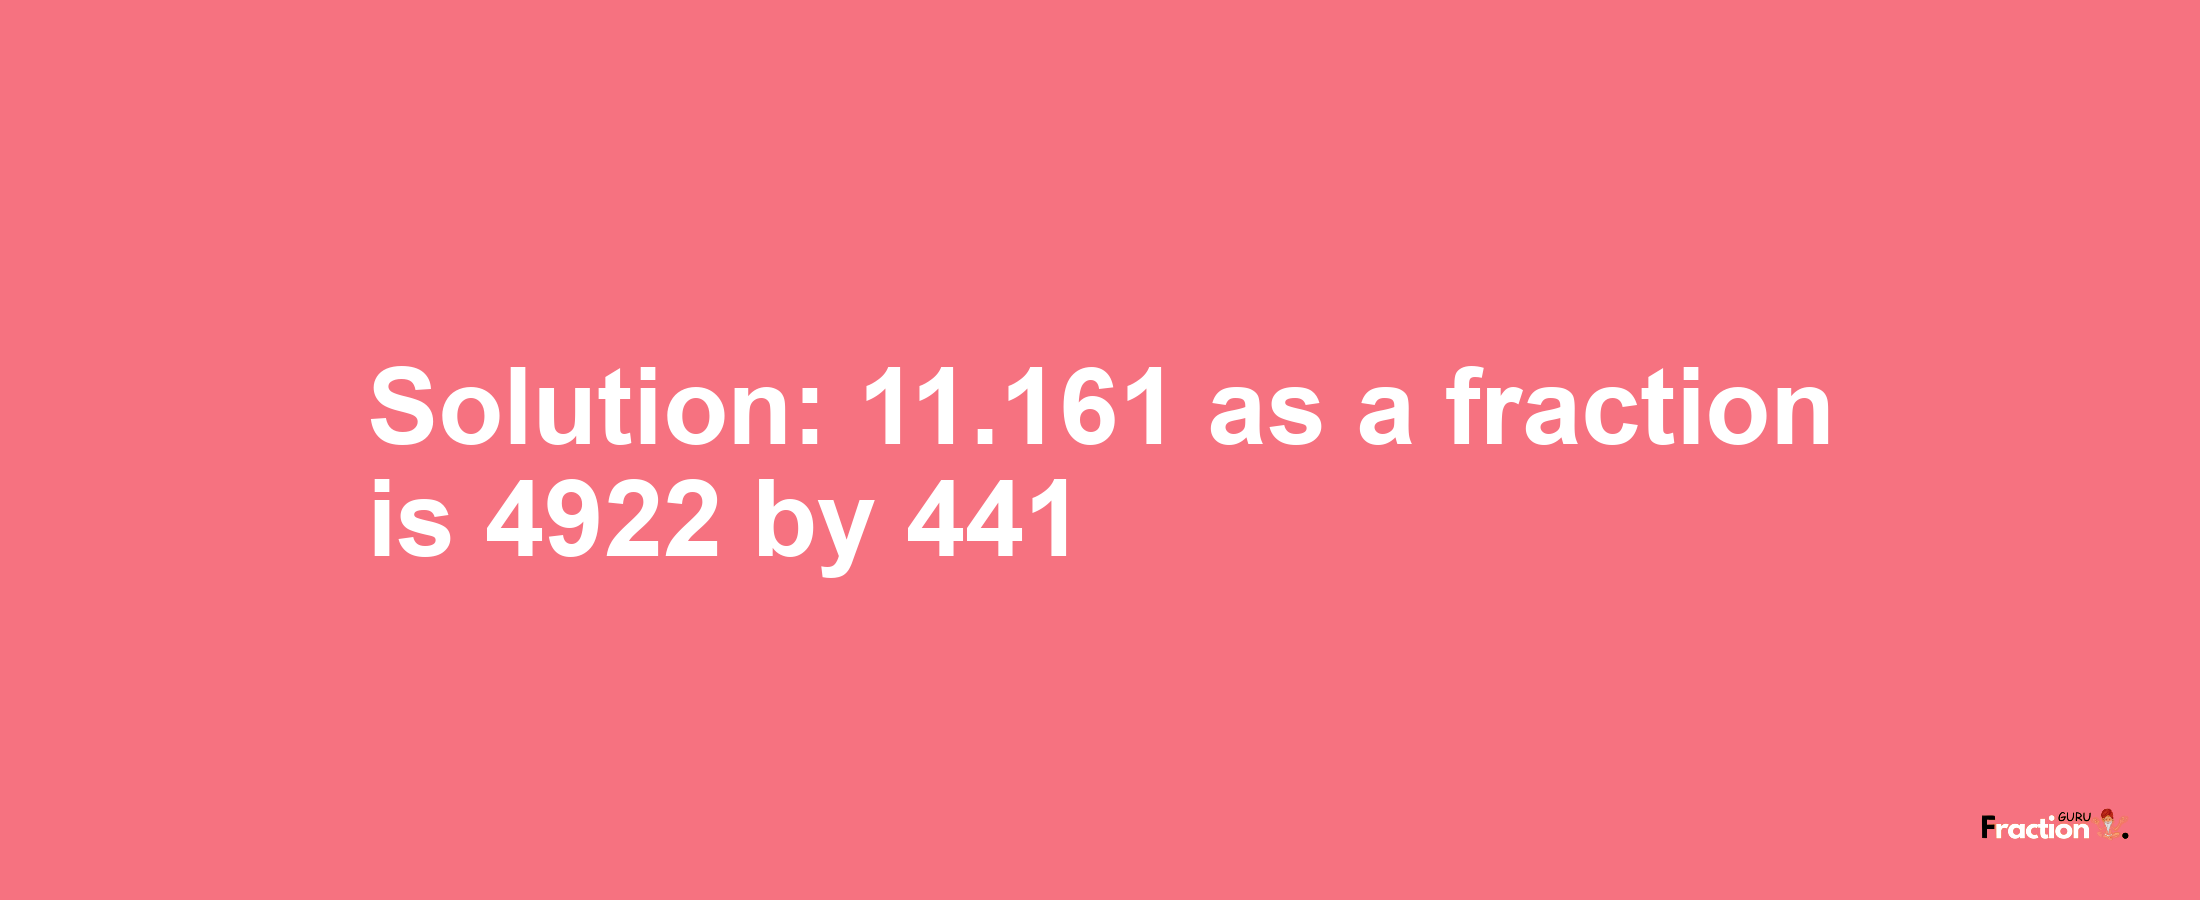 Solution:11.161 as a fraction is 4922/441